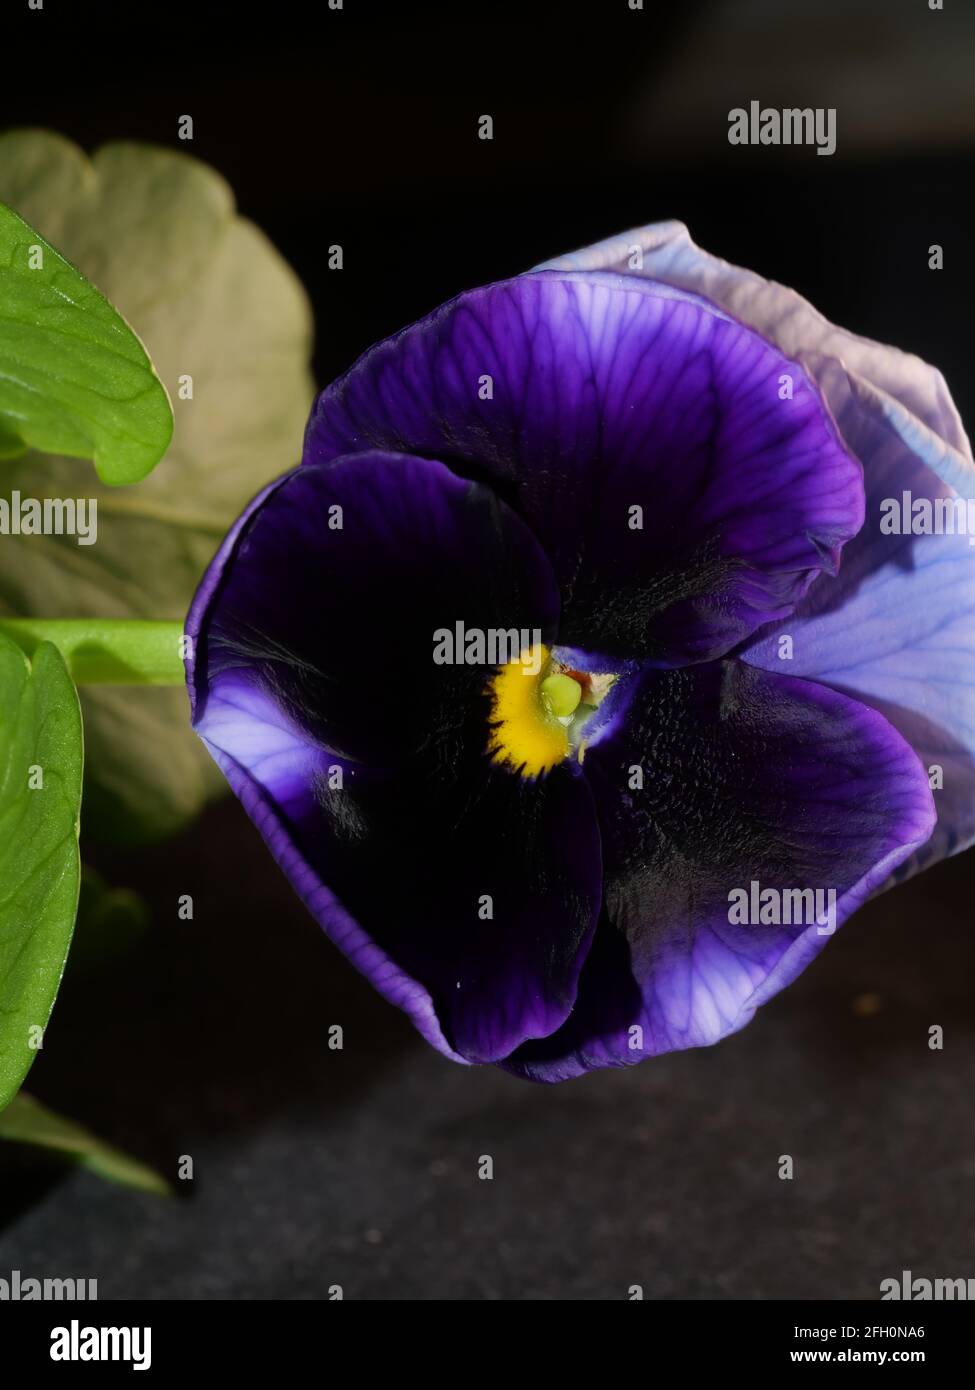 The garden pansy is a type of large flowered hybrid plant. Summer flowers Stock Photo